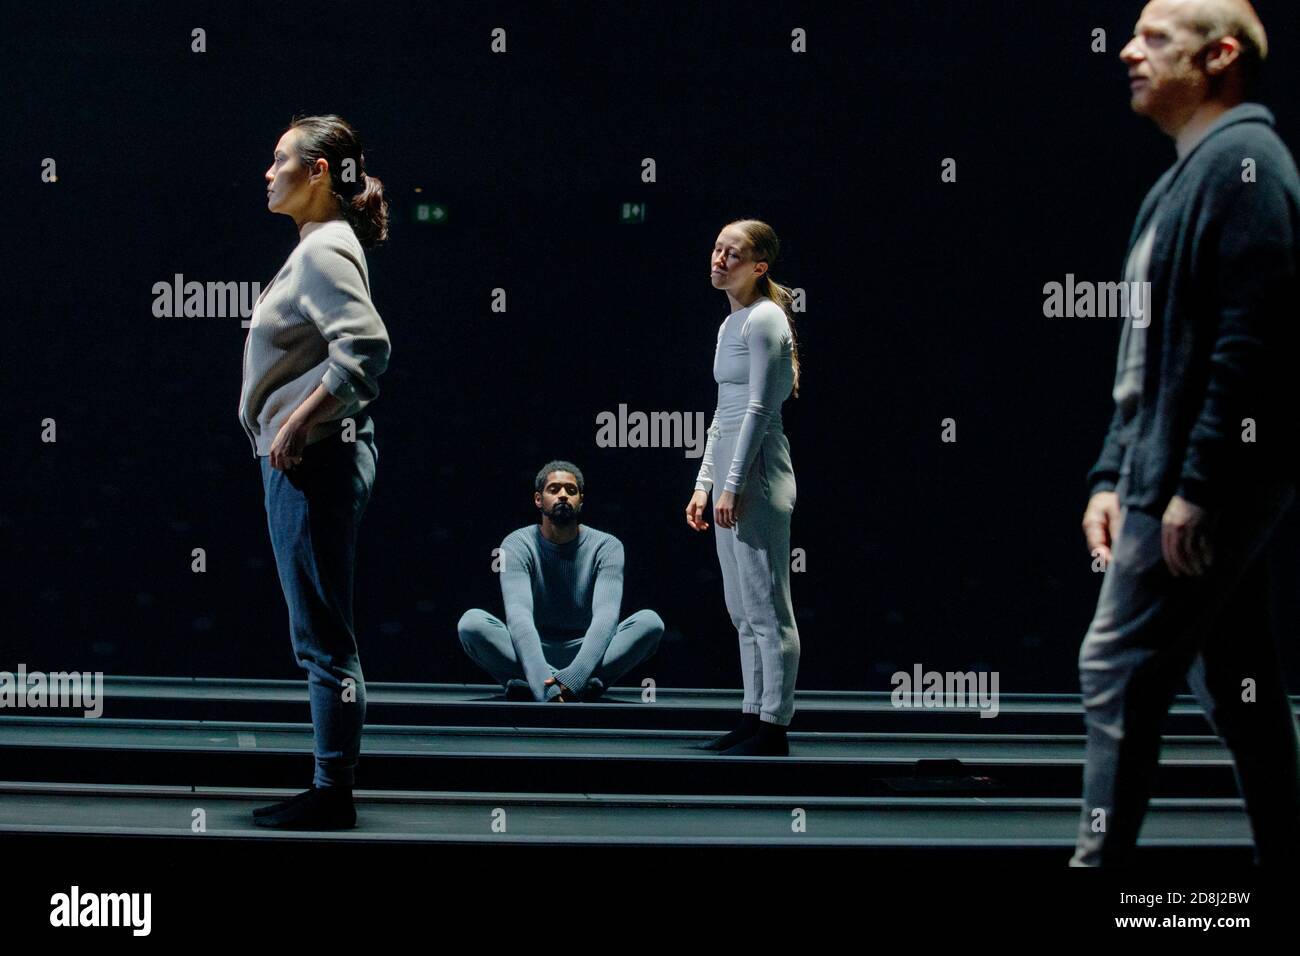 Chichester, West Sussex, UK, October 30, 2020 (L-R) Wendy Kweh as M, Alfred Enoch as B, Erin Doherty as C and Jonathan Slinger as A, perform in Sarah Kane's 'Crave' at the Chichester Festival Theatre, West Sussex, UK Friday October 30, 2020.  Characters move across the stage on travelators during the socially distanced performance. Photograph : Luke MacGregor Credit: Luke MacGregor/Alamy Live News Stock Photo